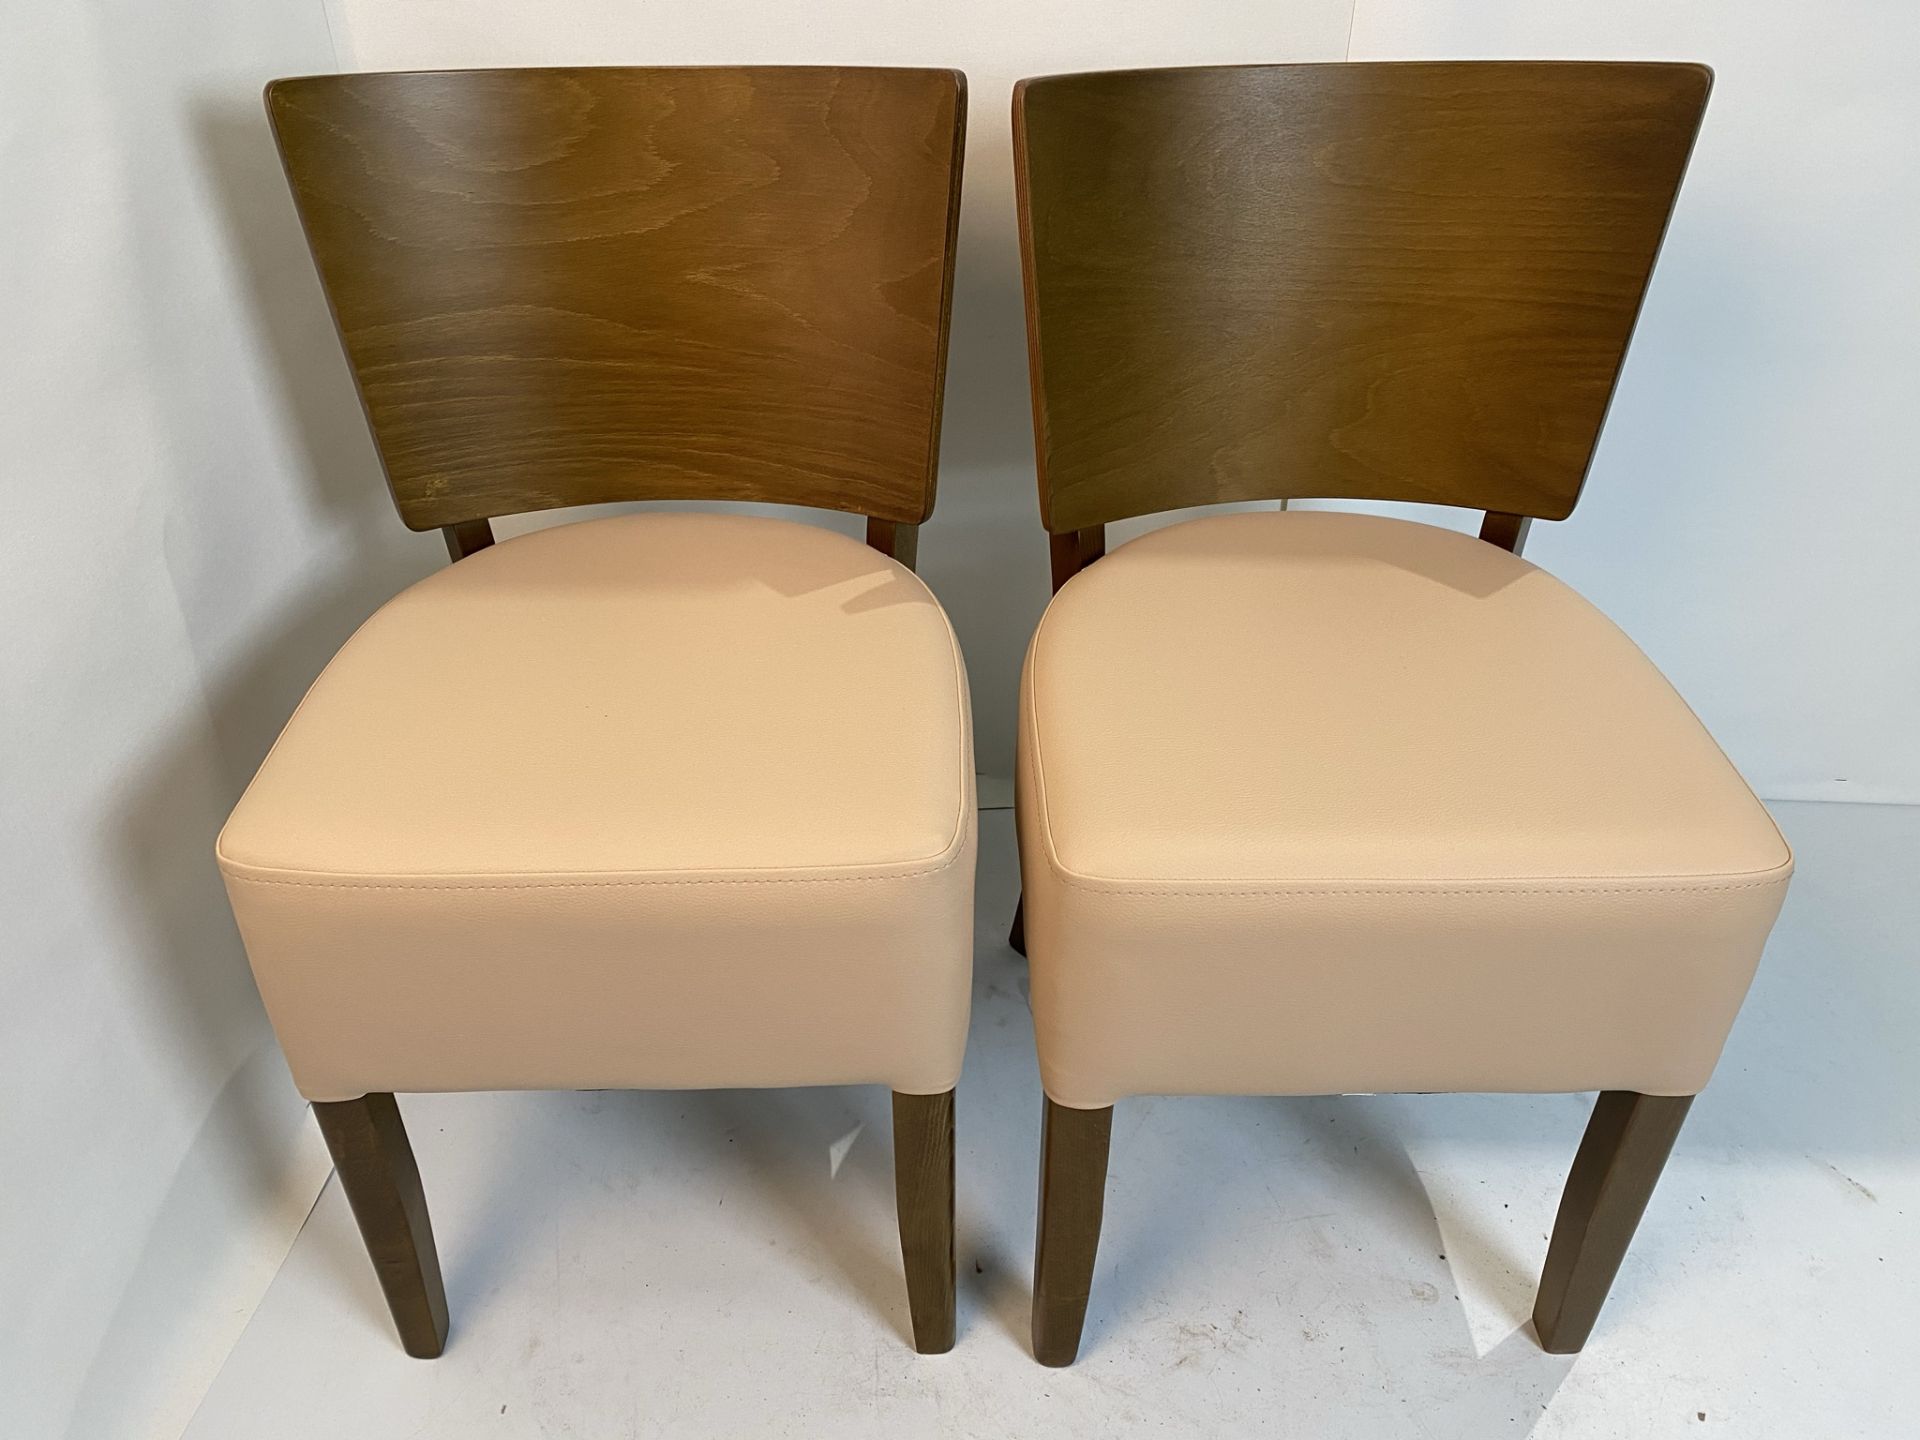 2 x Rebecca Vena BE-10 dining/side chairs with B. - Image 2 of 6